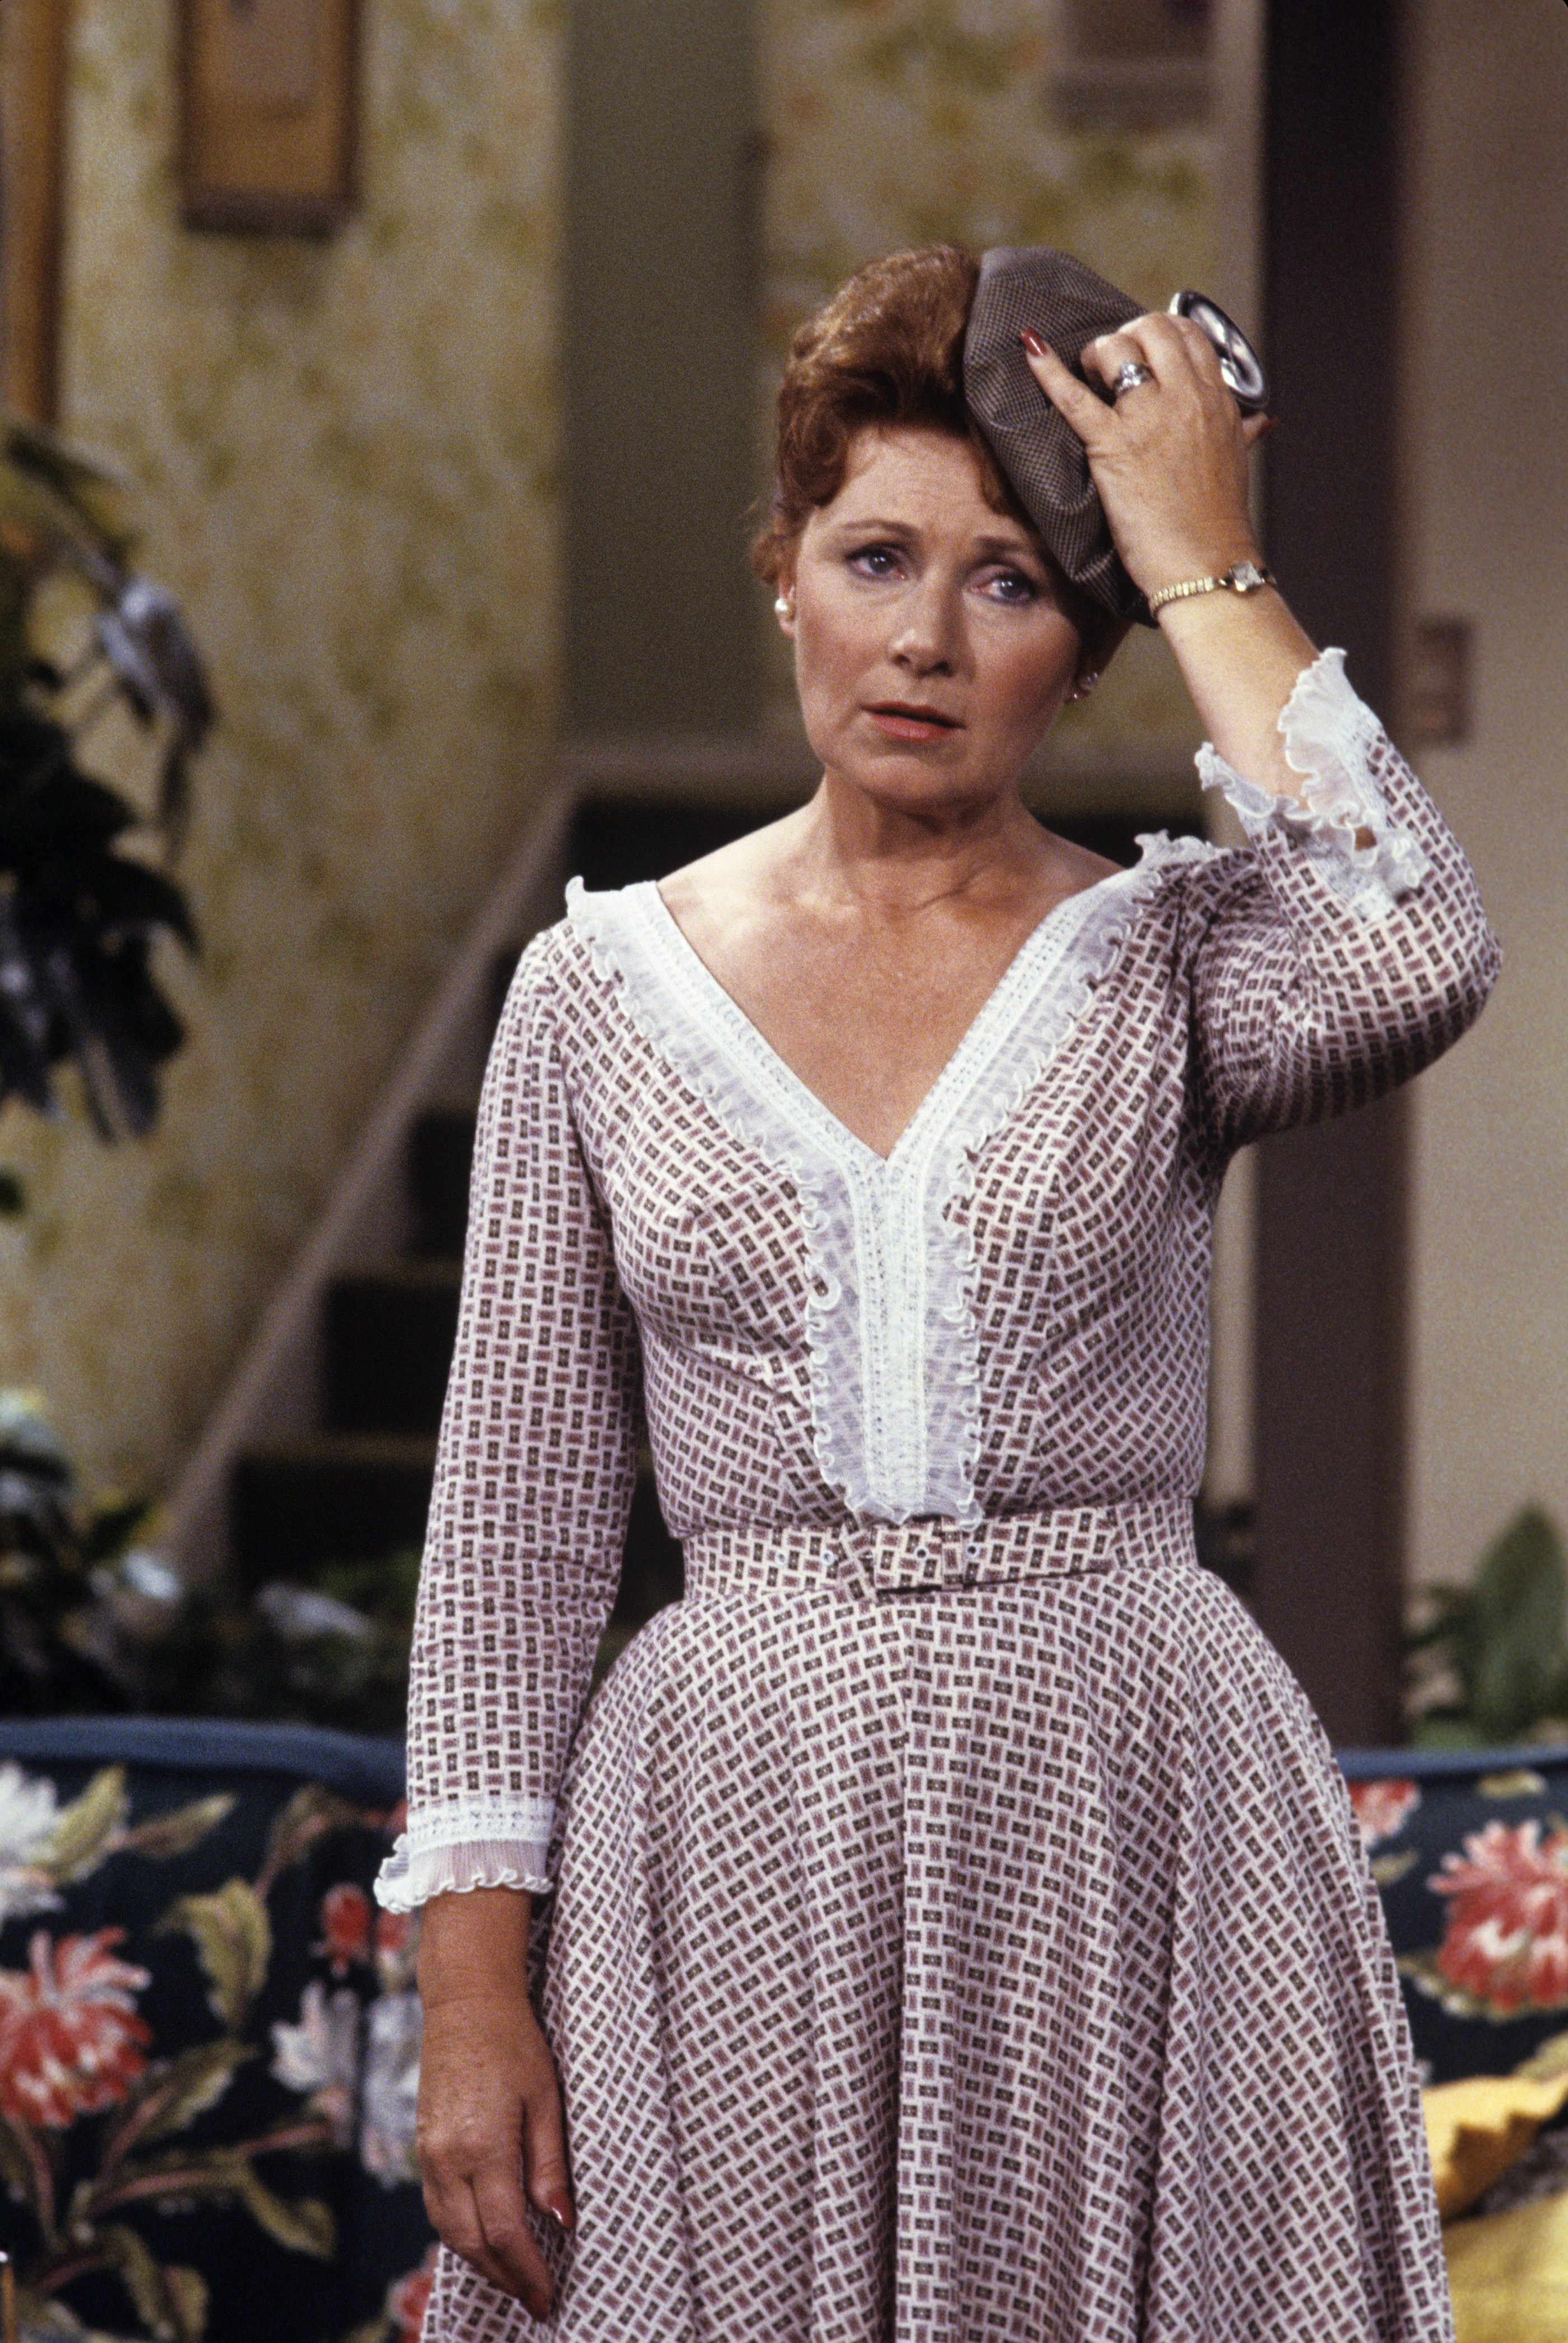 Marion Ross in "Happy Days" on November 3, 1980 | Source: Getty Images